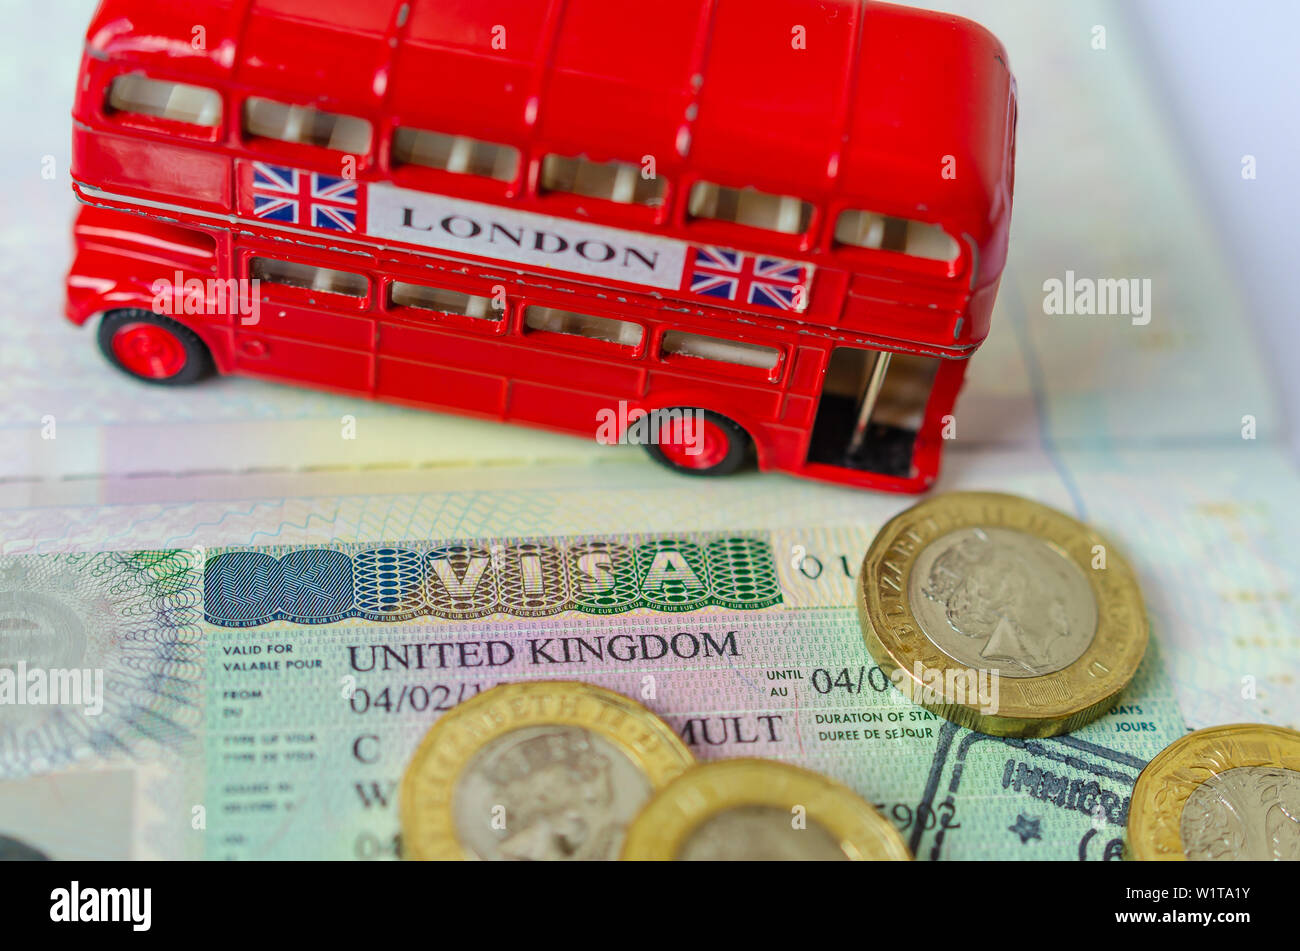 UK visa sticker in a passport surrounded by pound coins and double-decker bus model. Concept for travel and holiday. Stock Photo